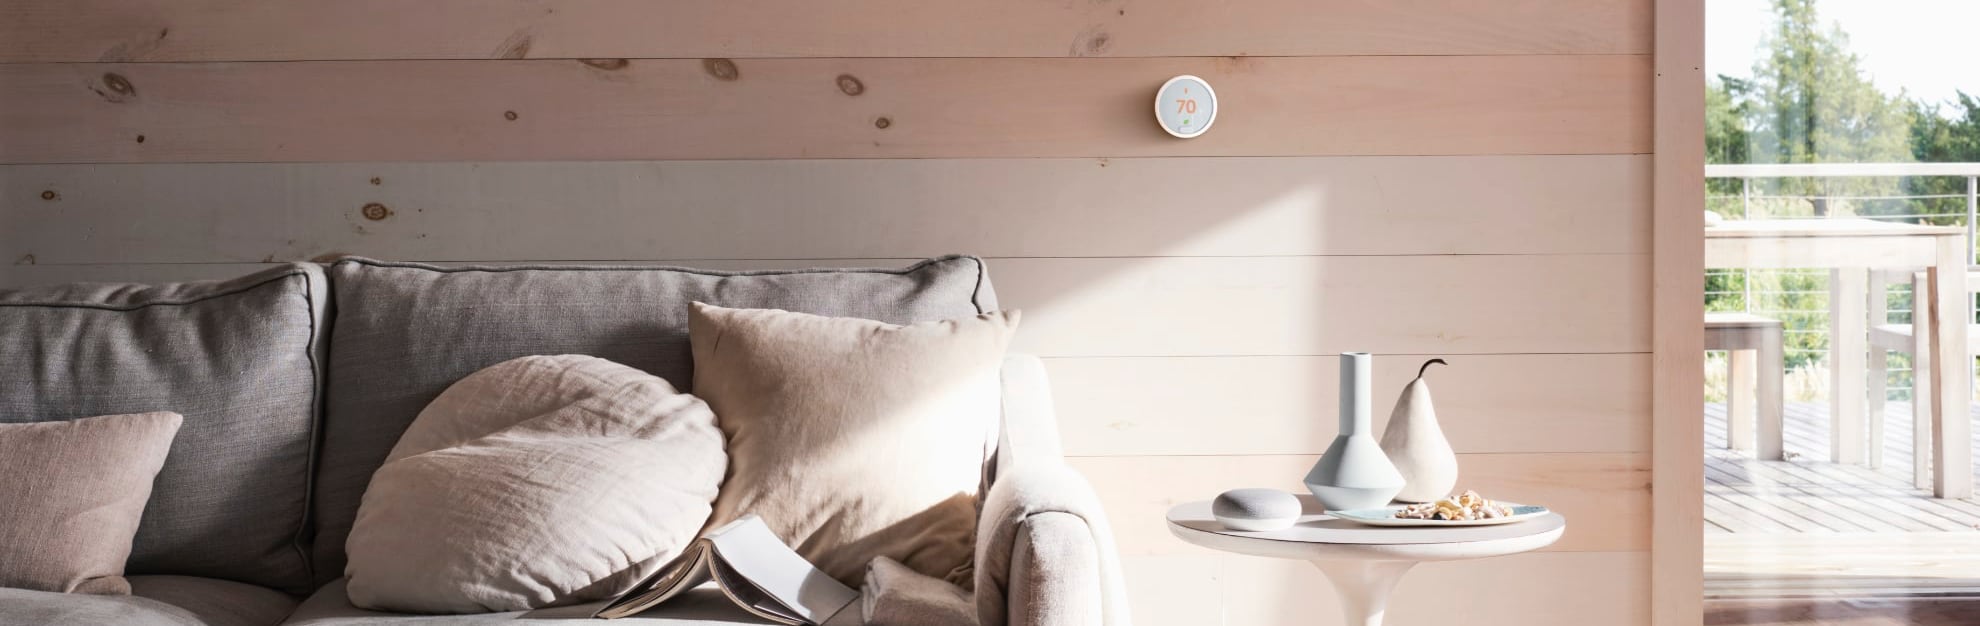 Vivint Home Automation in Duluth